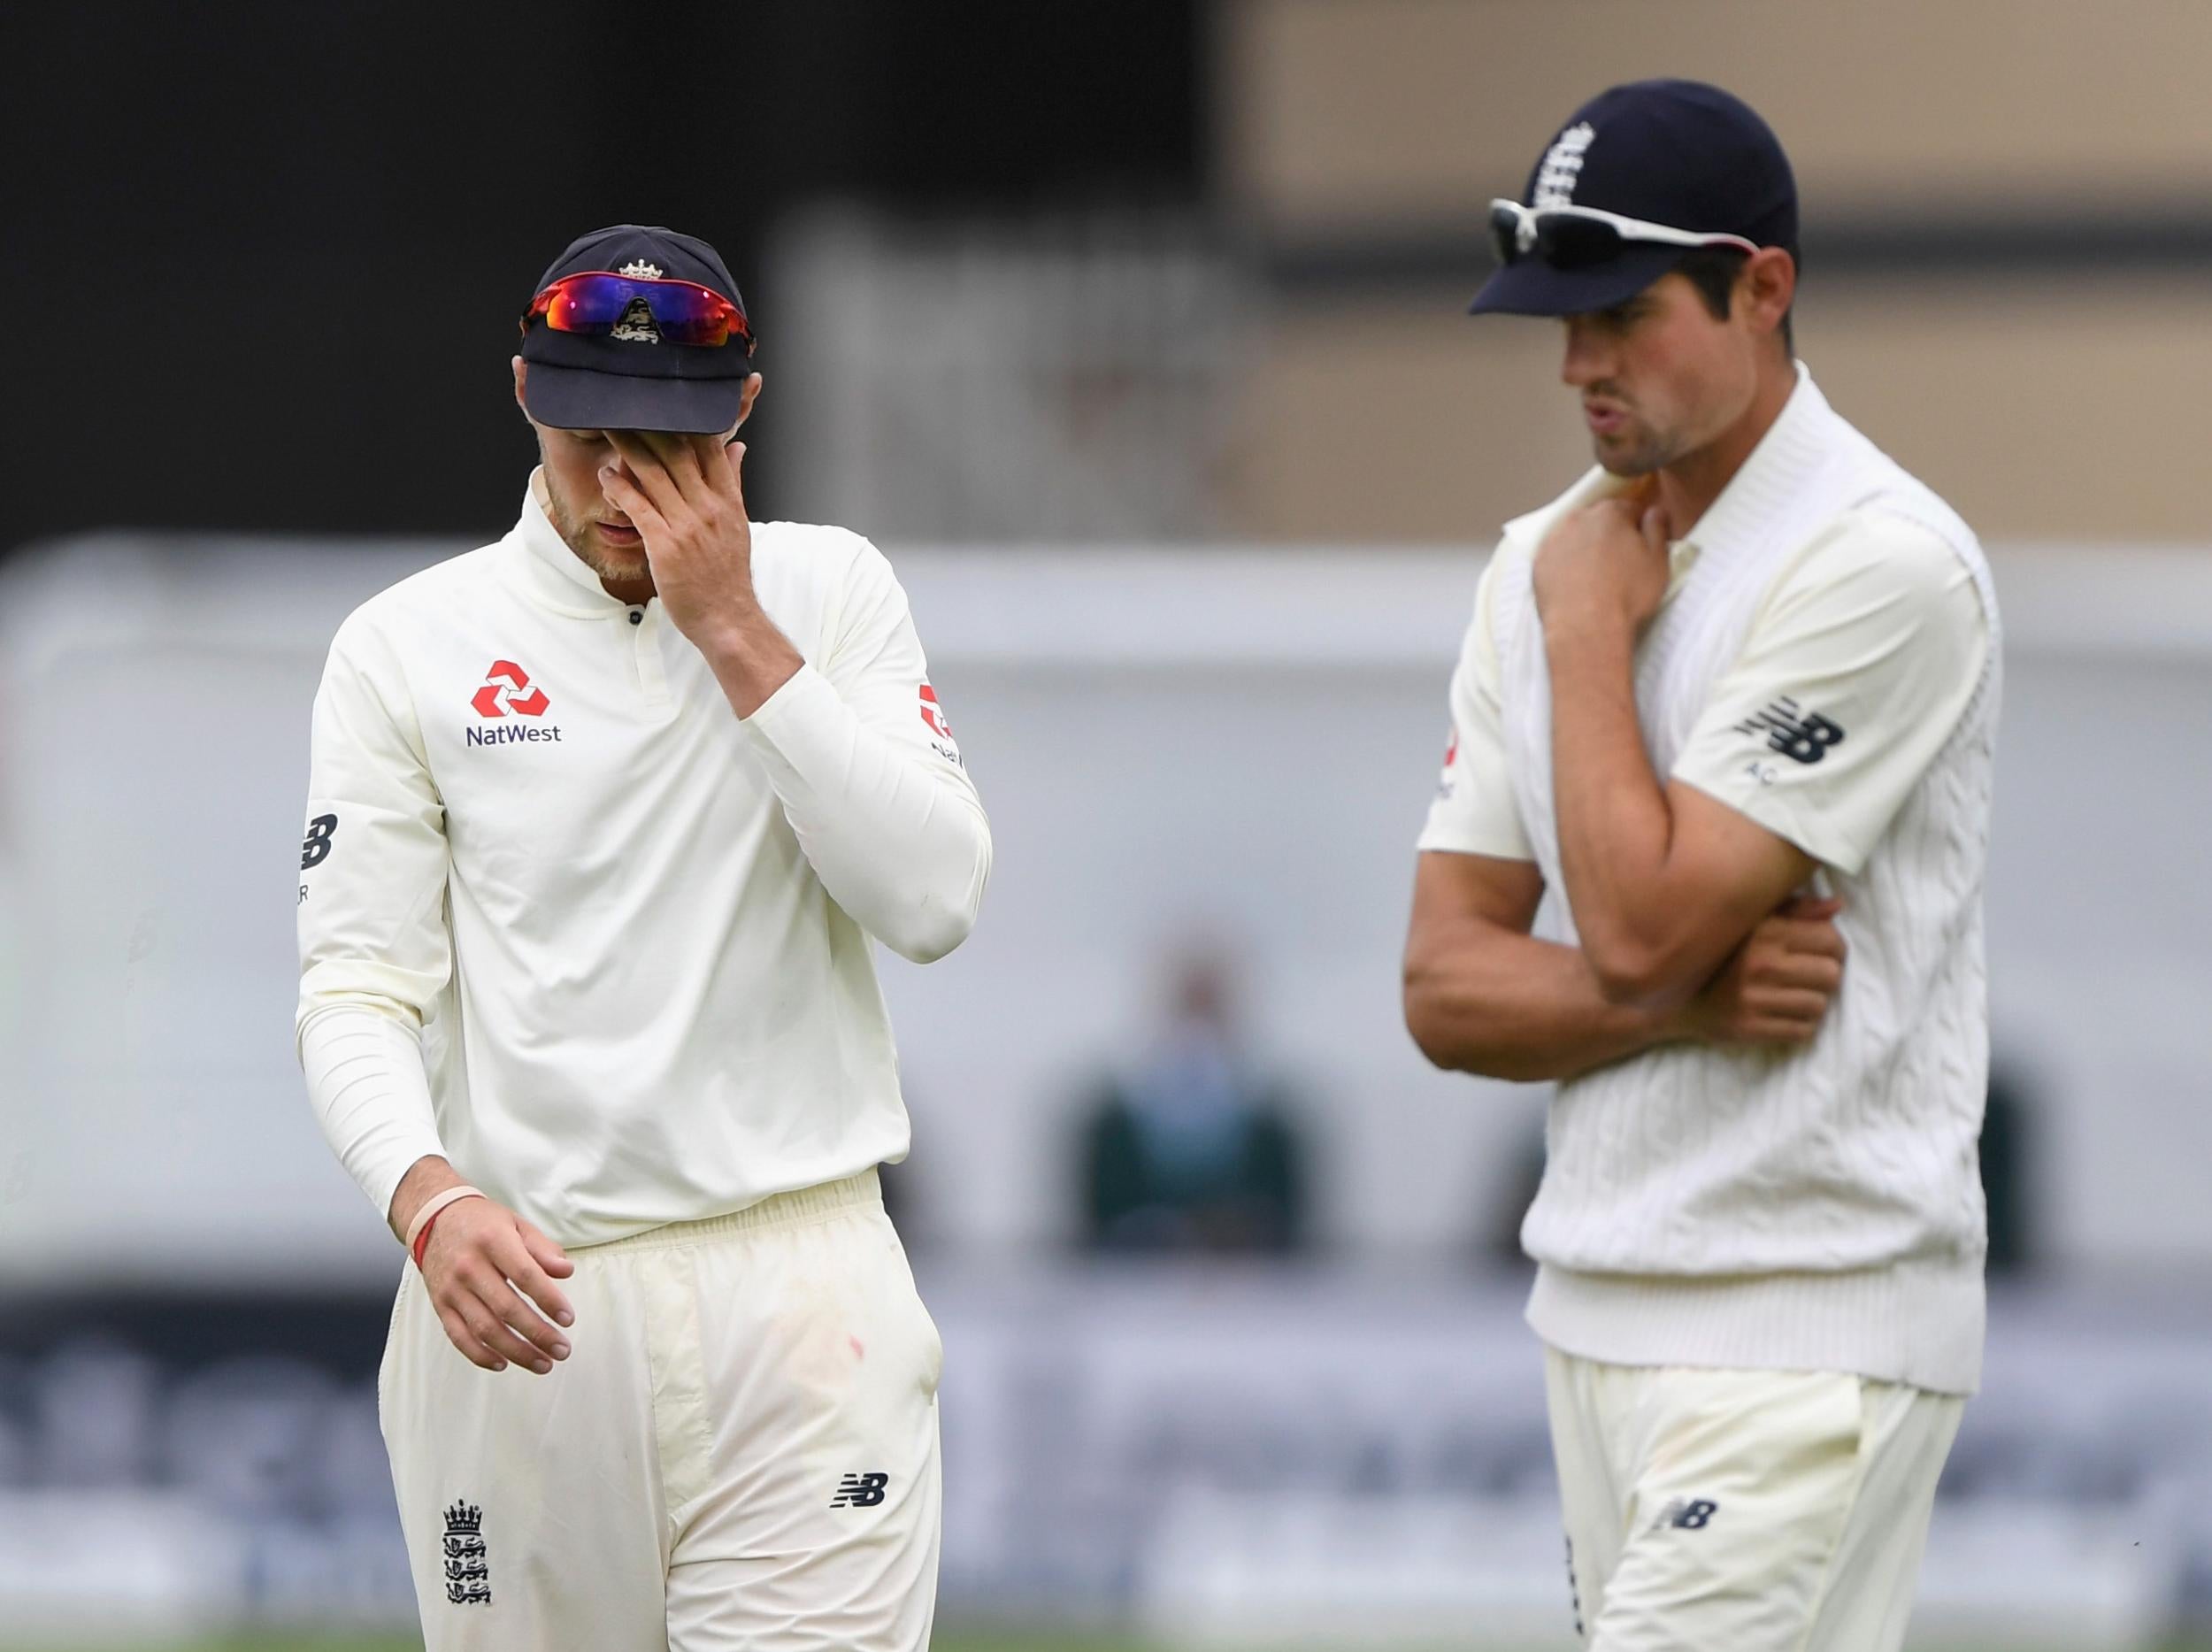 England have it all to do to save the second Test